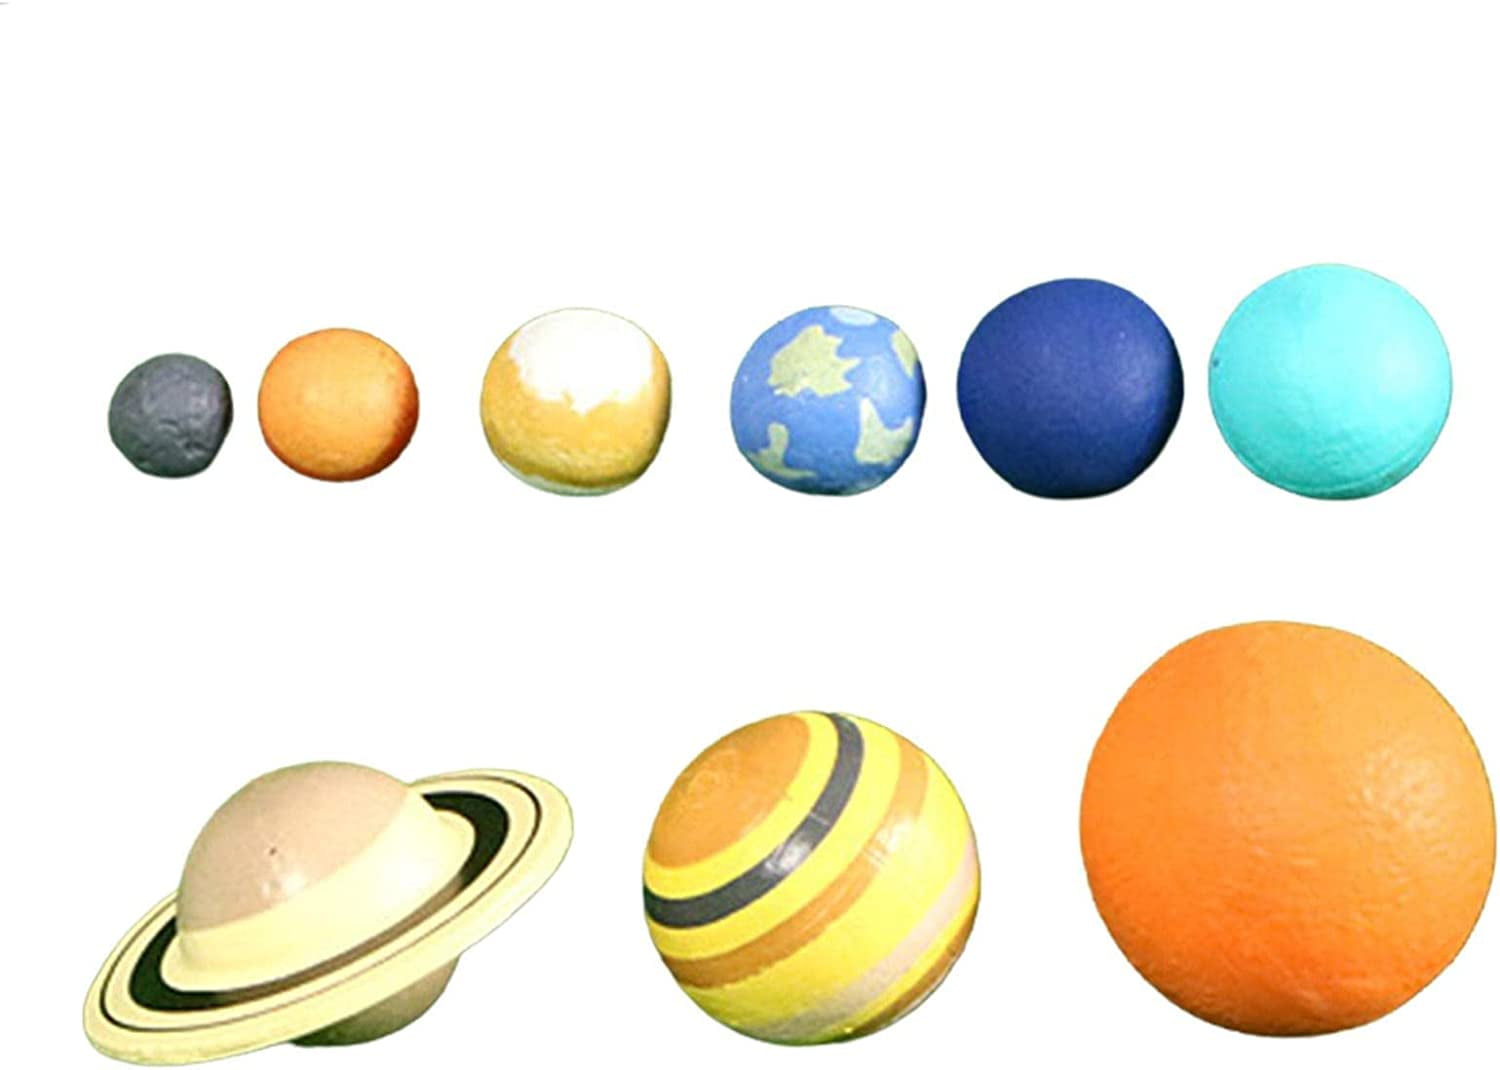 NUOBESTY 1 Set Solar System Stress Ball Solar Planets Balls Soft PU Fidget Squeeze Vent Toys Novelty Kids Solar System Toys for School Reward Party Bag Fillers 